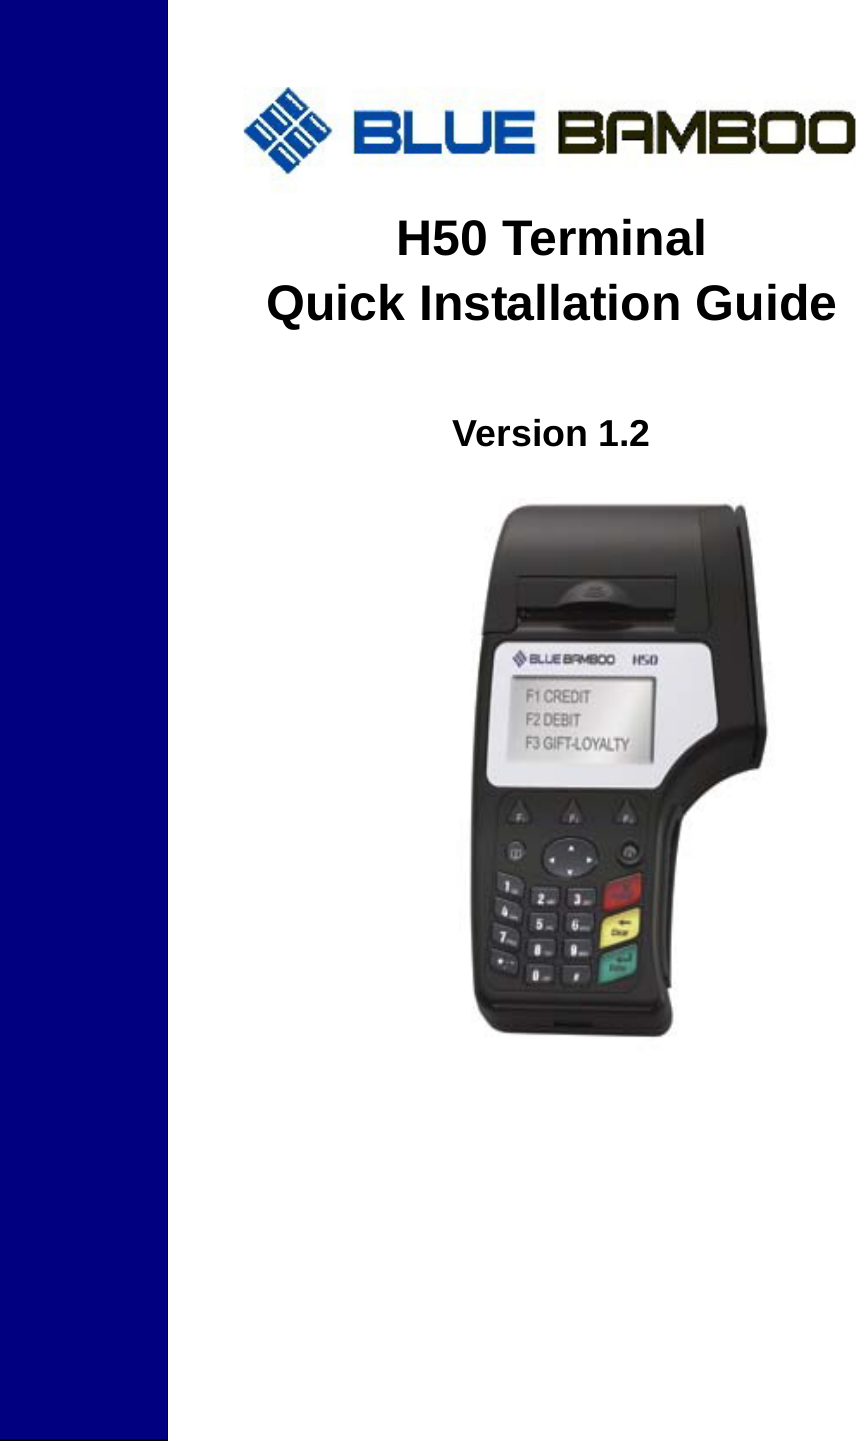      H50 Terminal Quick Installation Guide  Version 1.2          